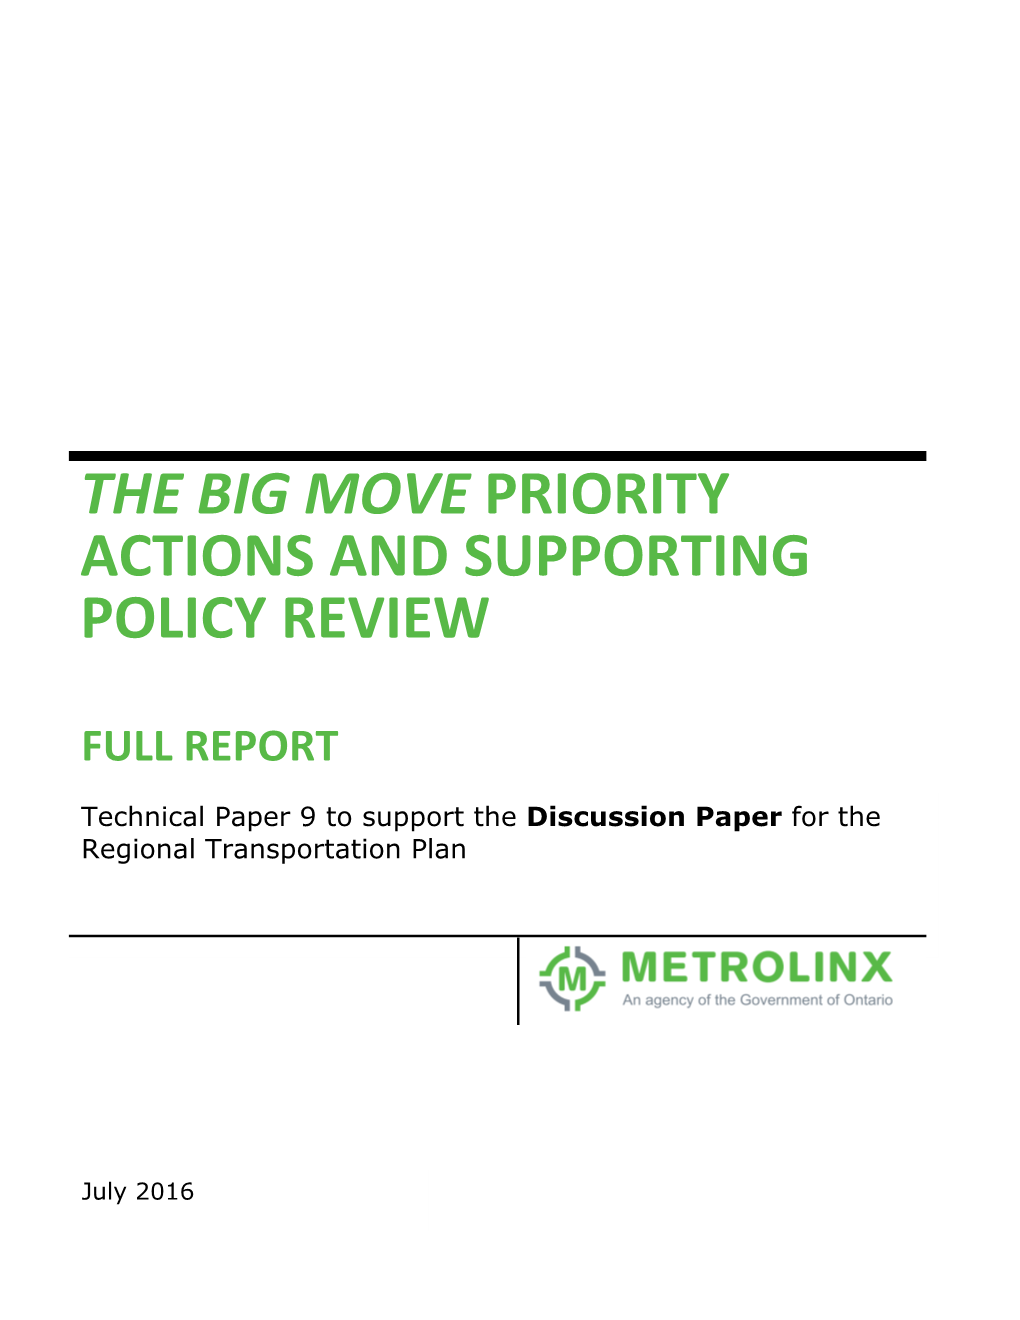 The Big Move Priority Actions and Supporting Policy Review